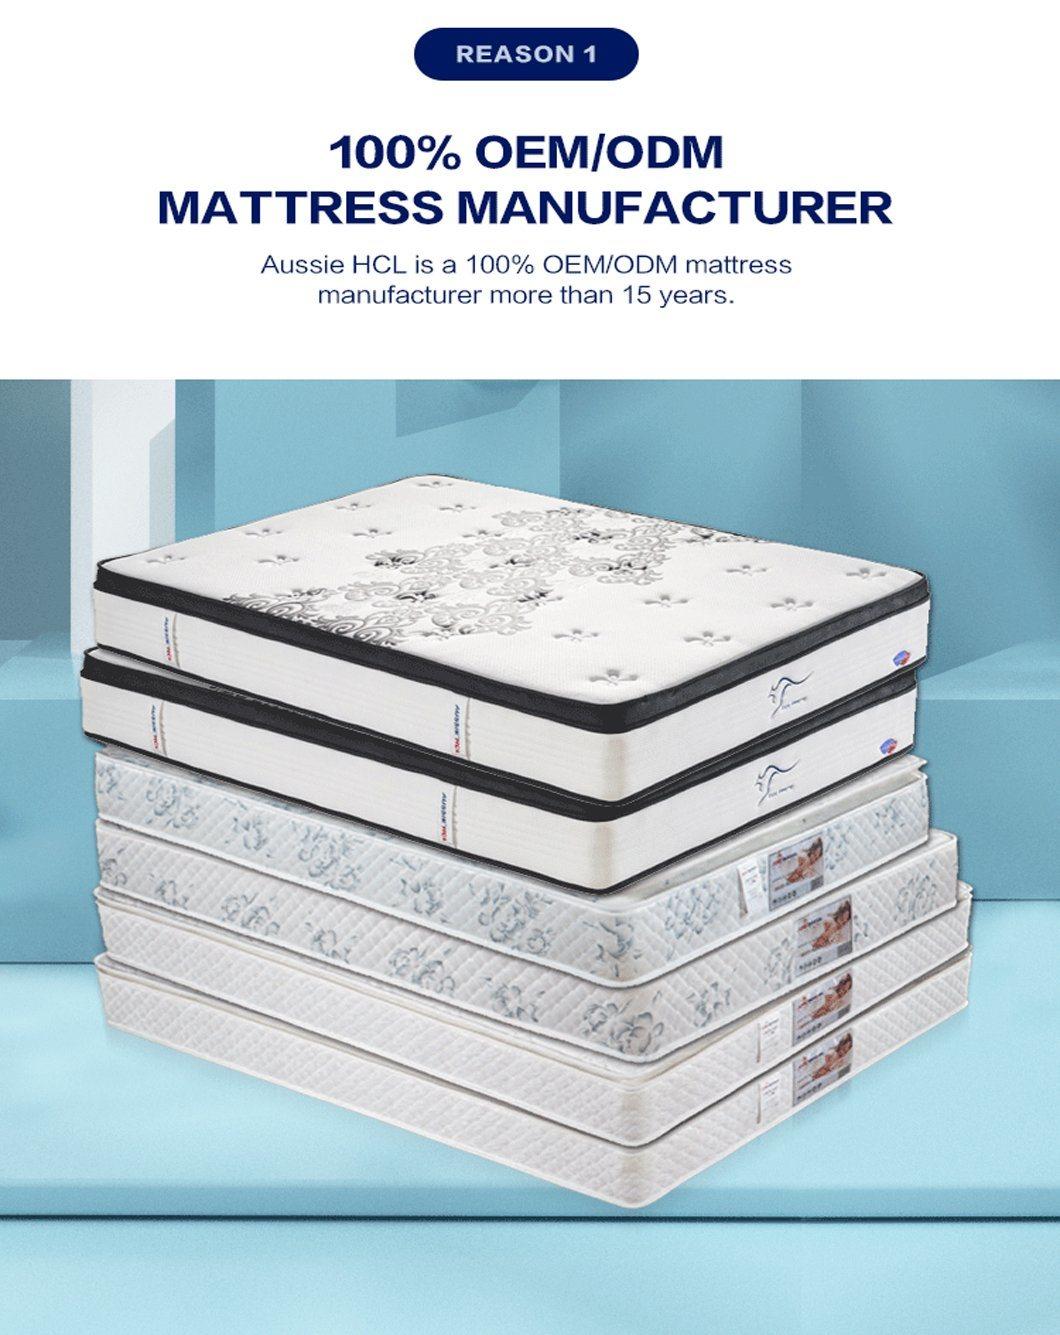 Factory Wholesale Best Price Removable Hypoallergenic Bamboo Mattress Memory Foam Spring Mattress